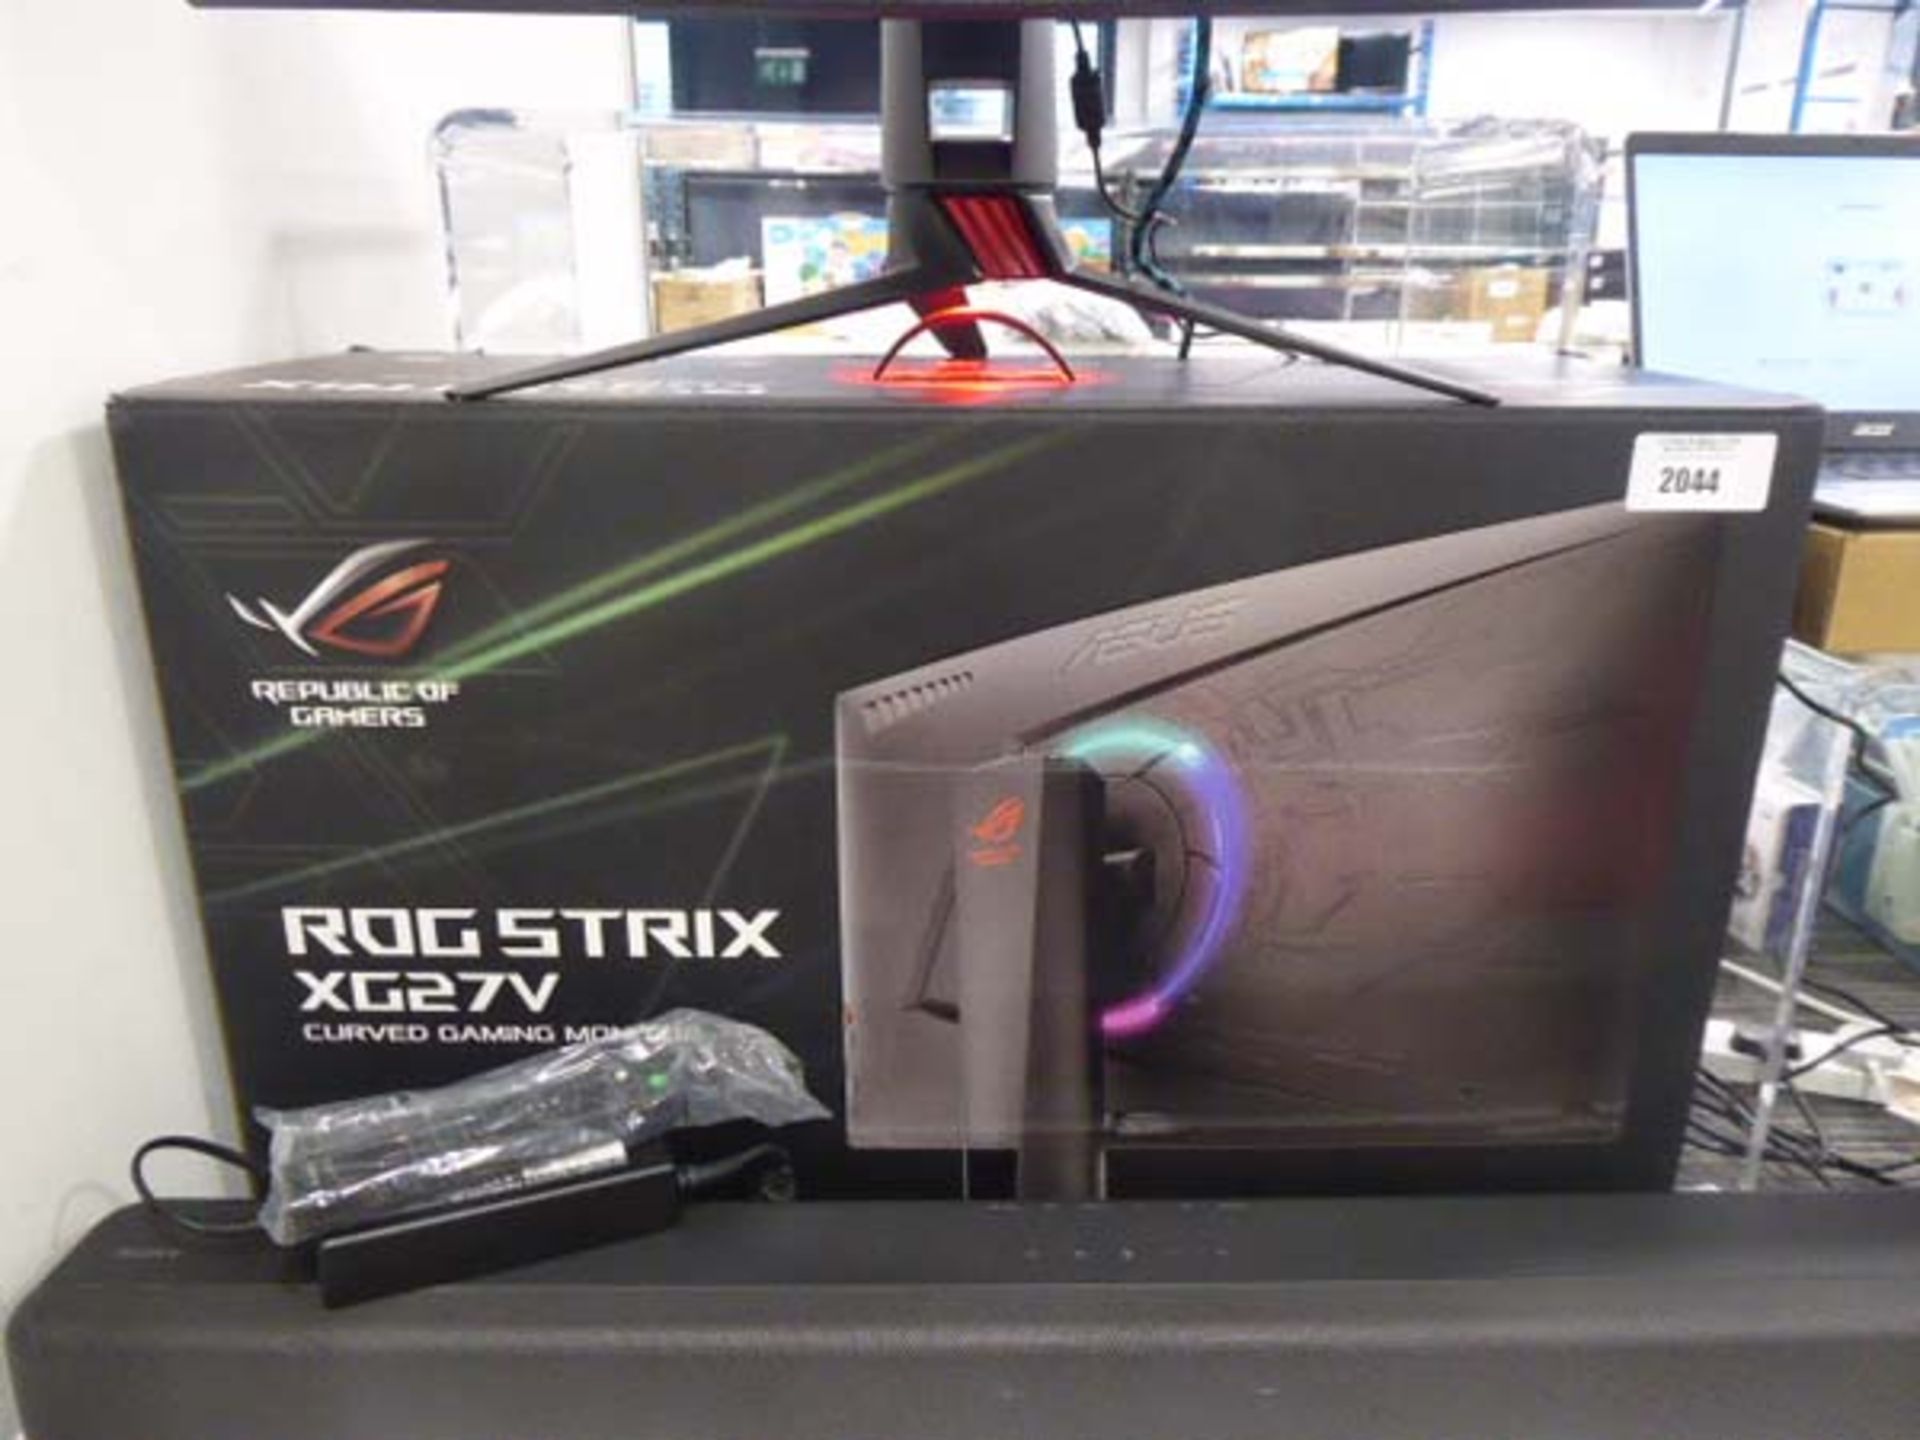 Asus R.O.G. Strix curved gaming monitor model XG27V with box and psu - Image 2 of 2